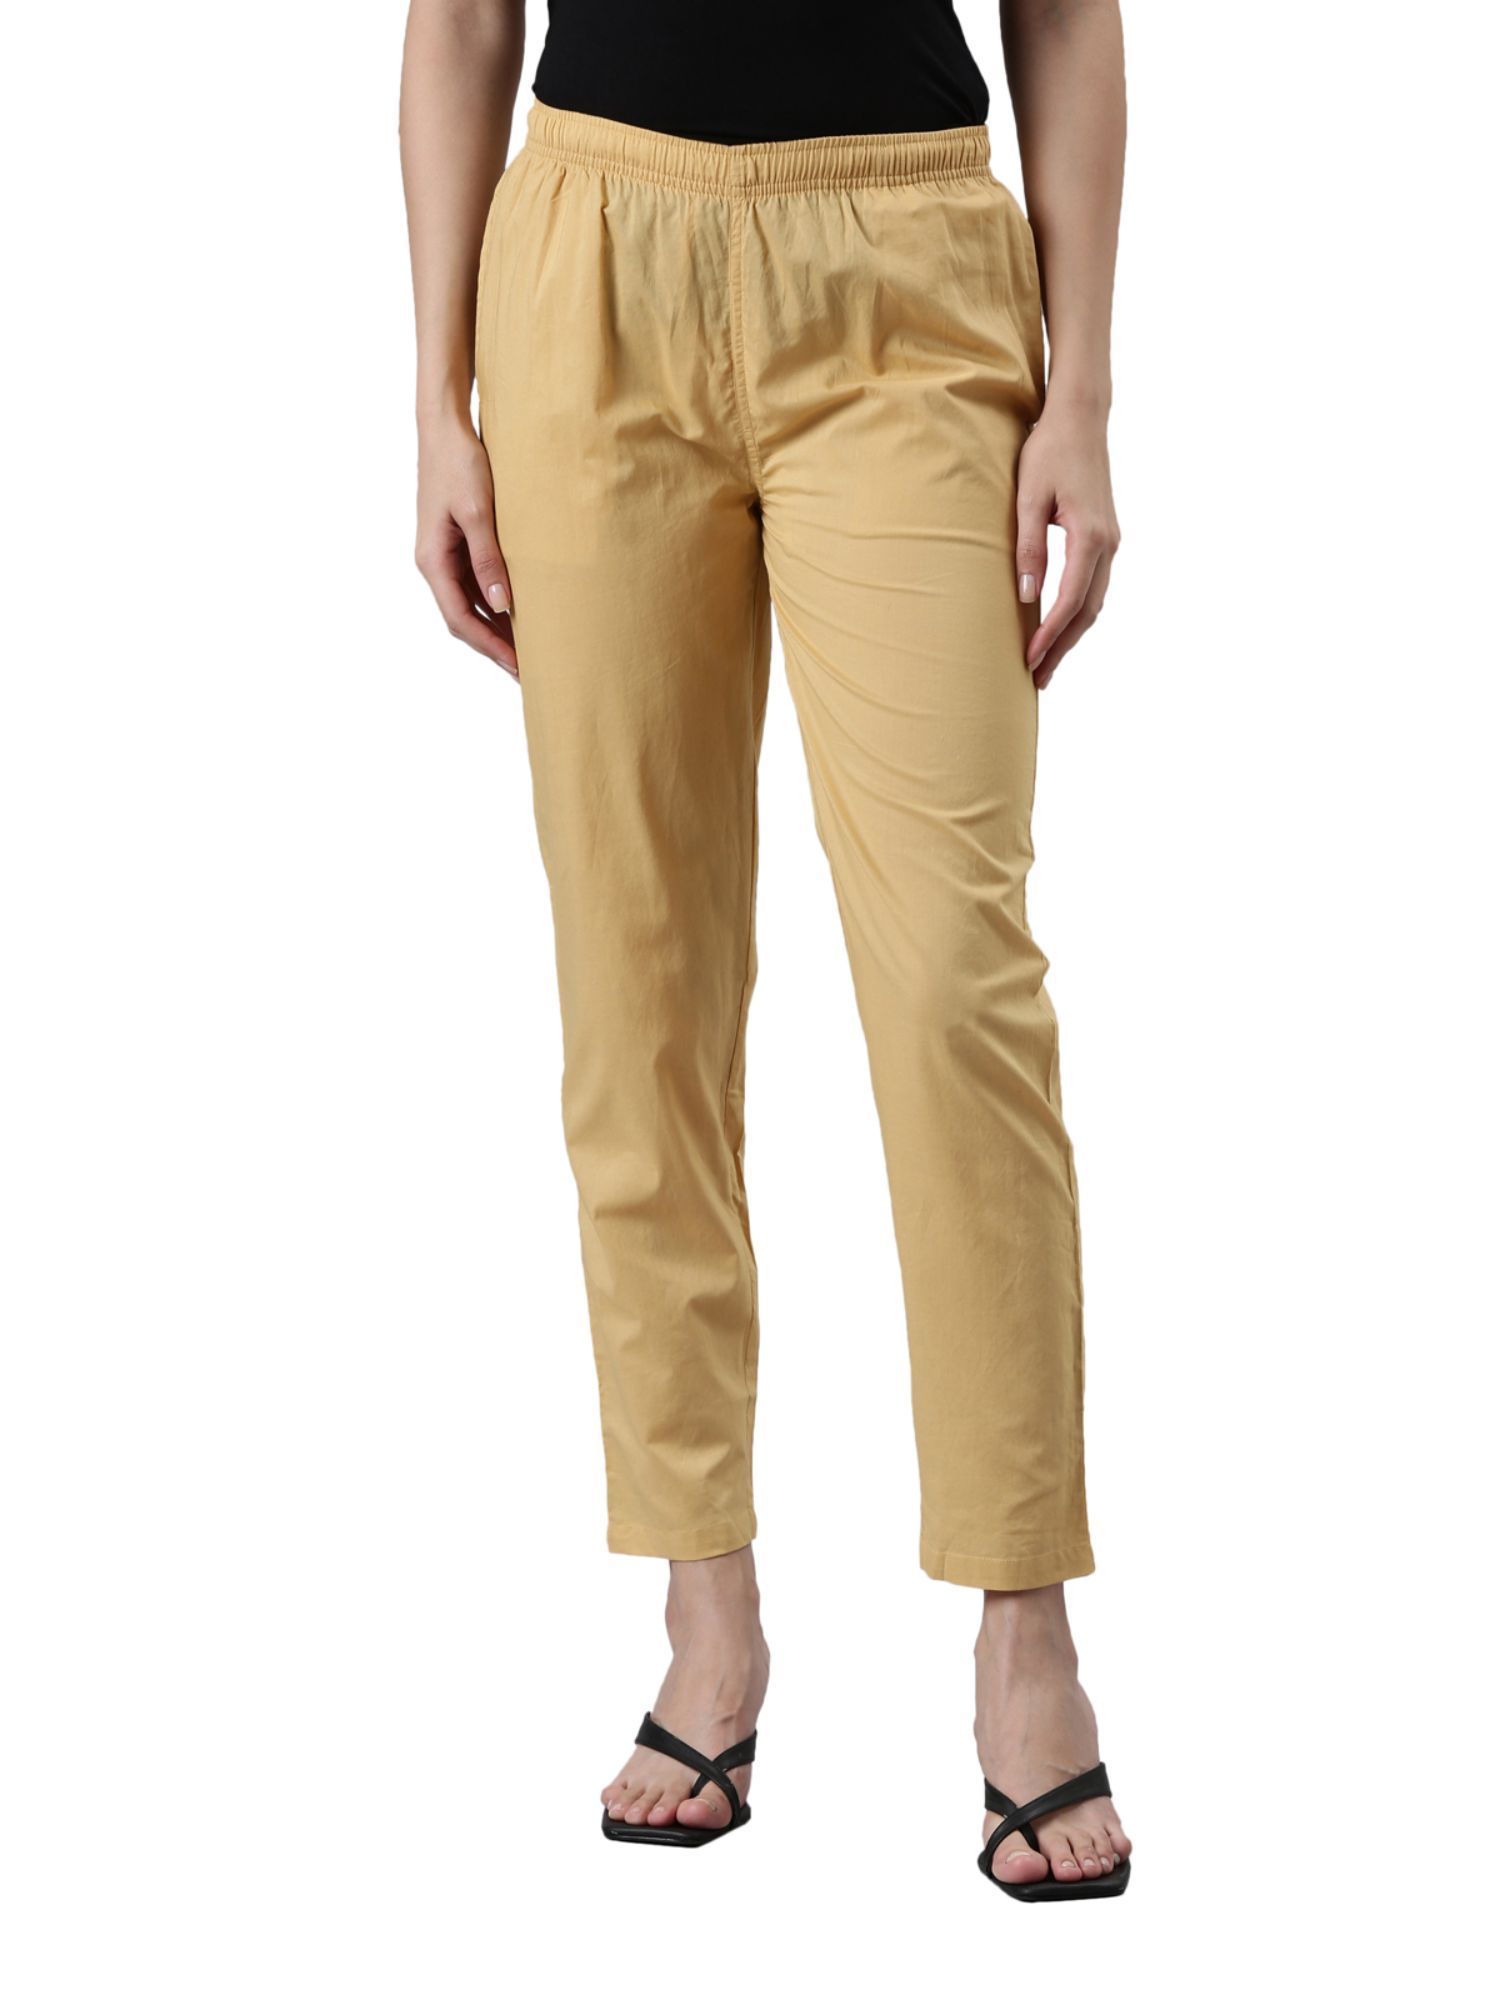 Buy Women Ankle Length Pants Golden Solid Taffeta Silk for Best Price  Reviews Free Shipping